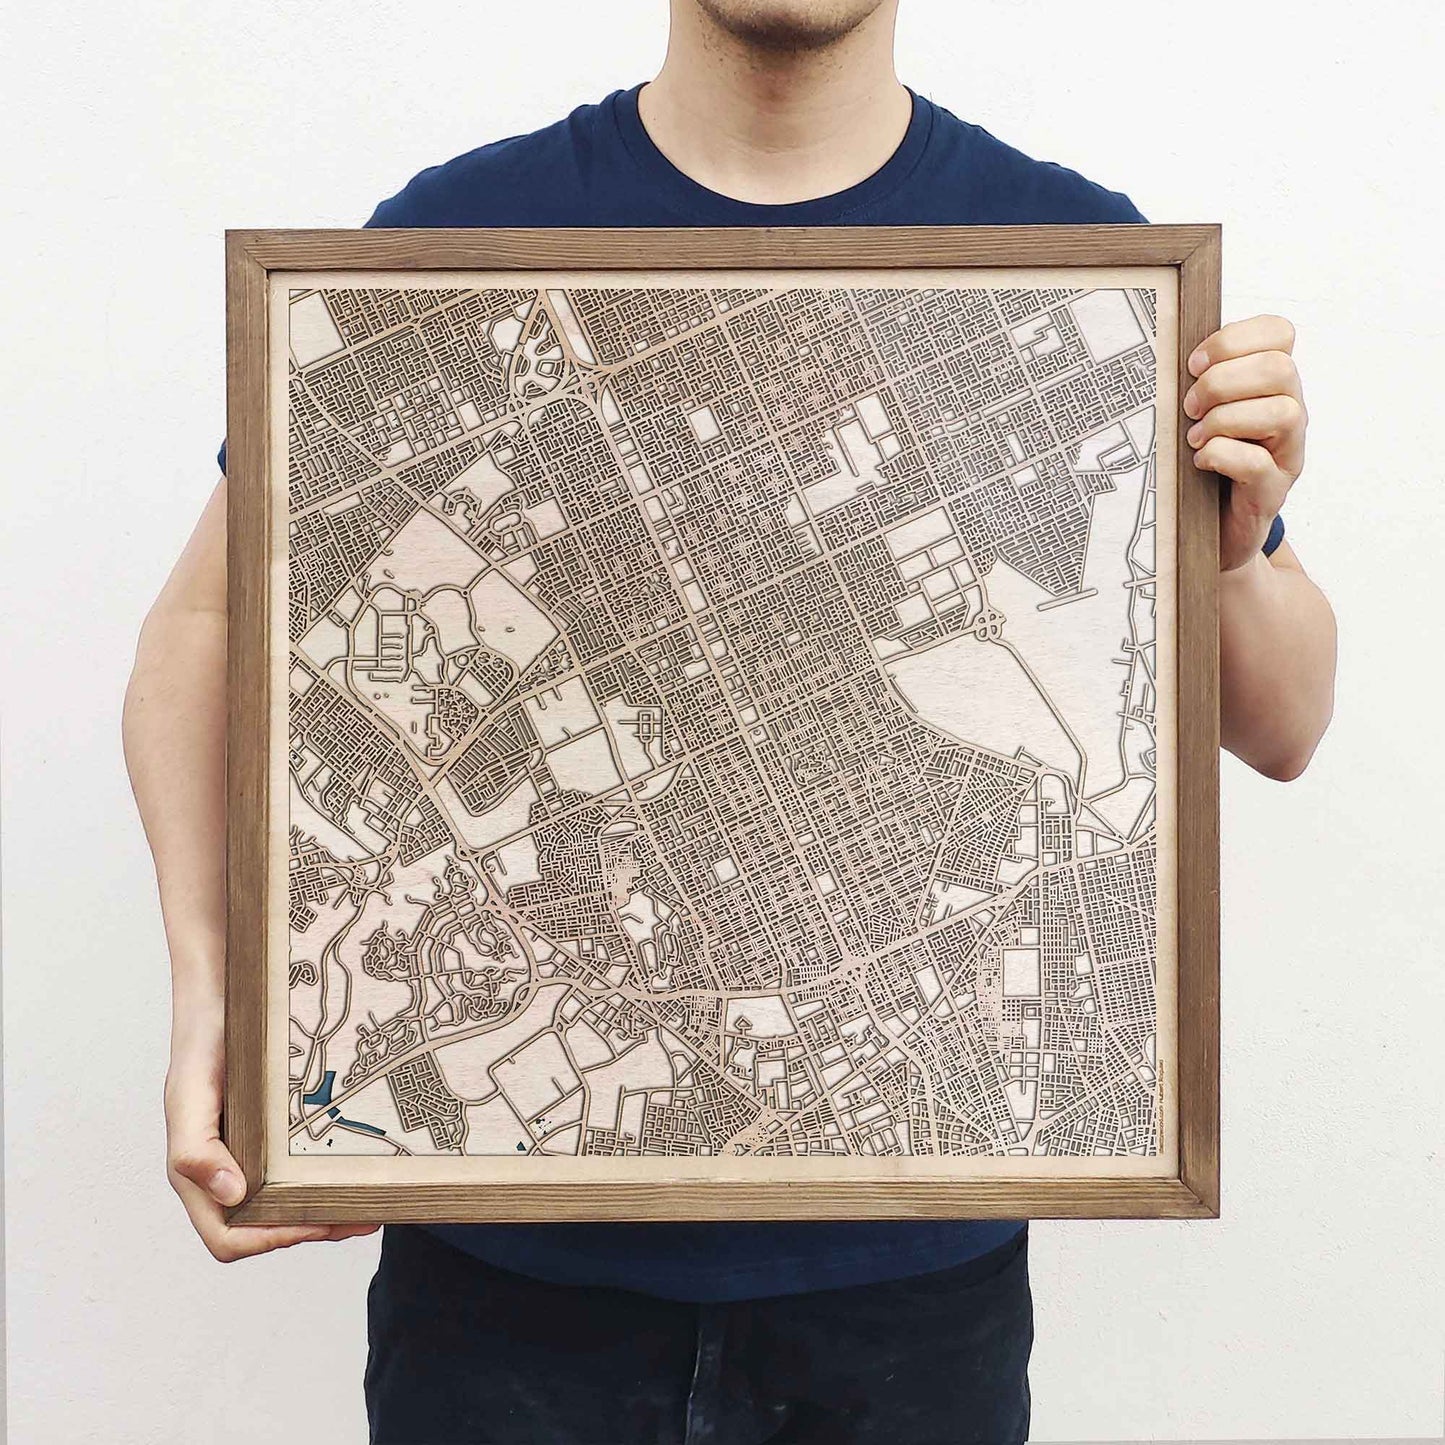 Riyadh Wooden Map by CityWood - Custom Wood Map Art - Unique Laser Cut Engraved - Anniversary Gift